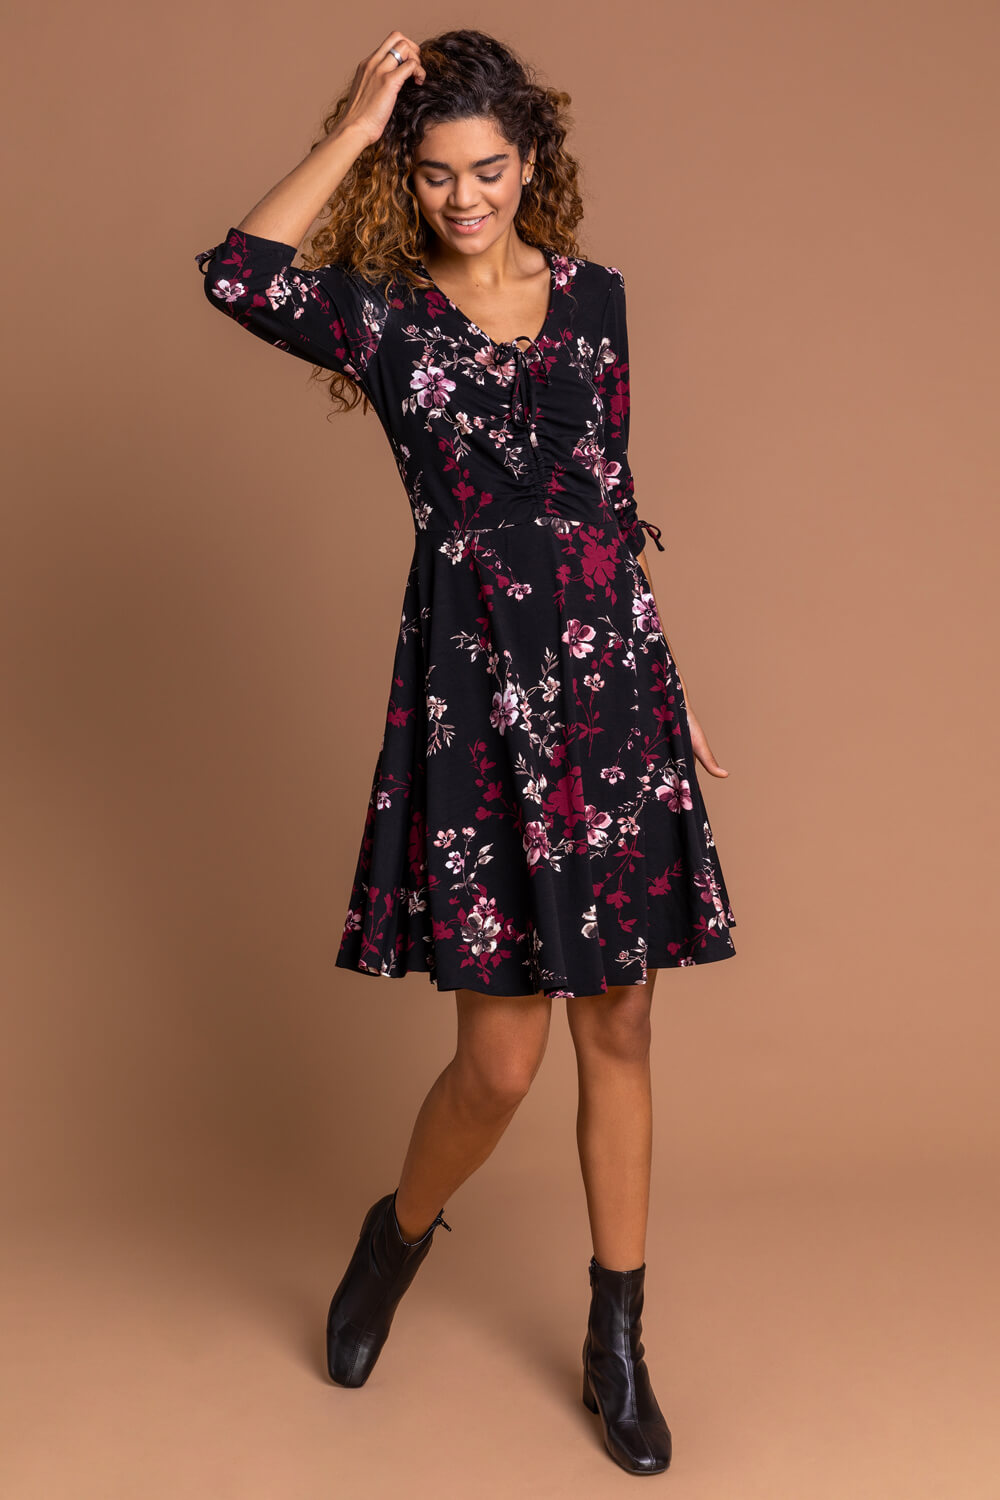 Wine Floral Print Gathered Dress, Image 3 of 5